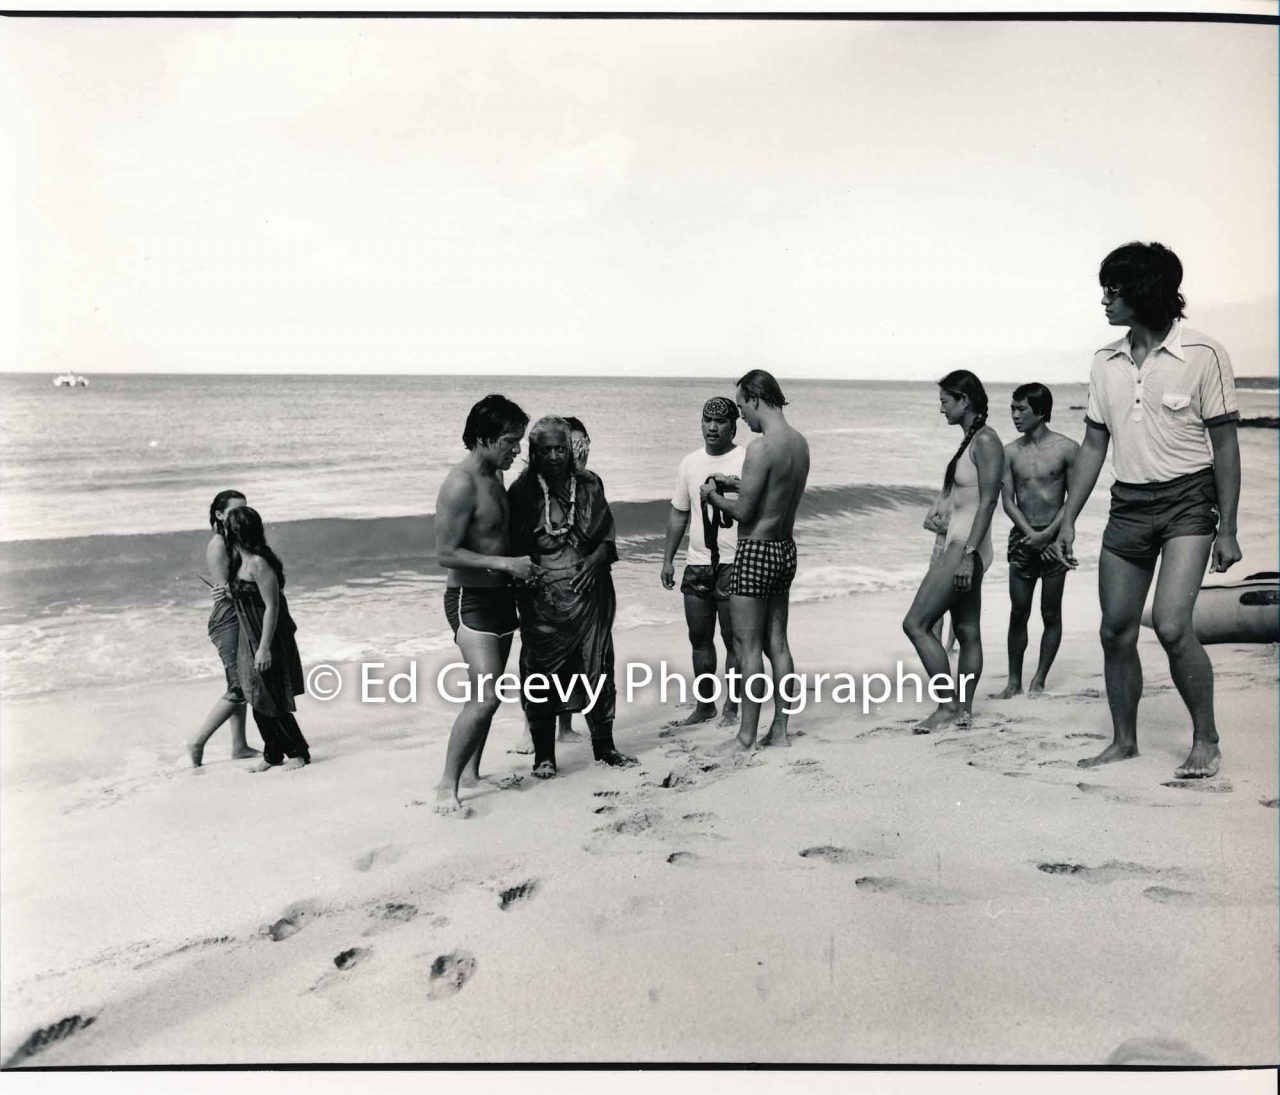 Aunty Emma DeFries is welcomed ashore on Kahoʻolawe by Frank Hewett and Rell Sunn | Ed Greevy Photographer